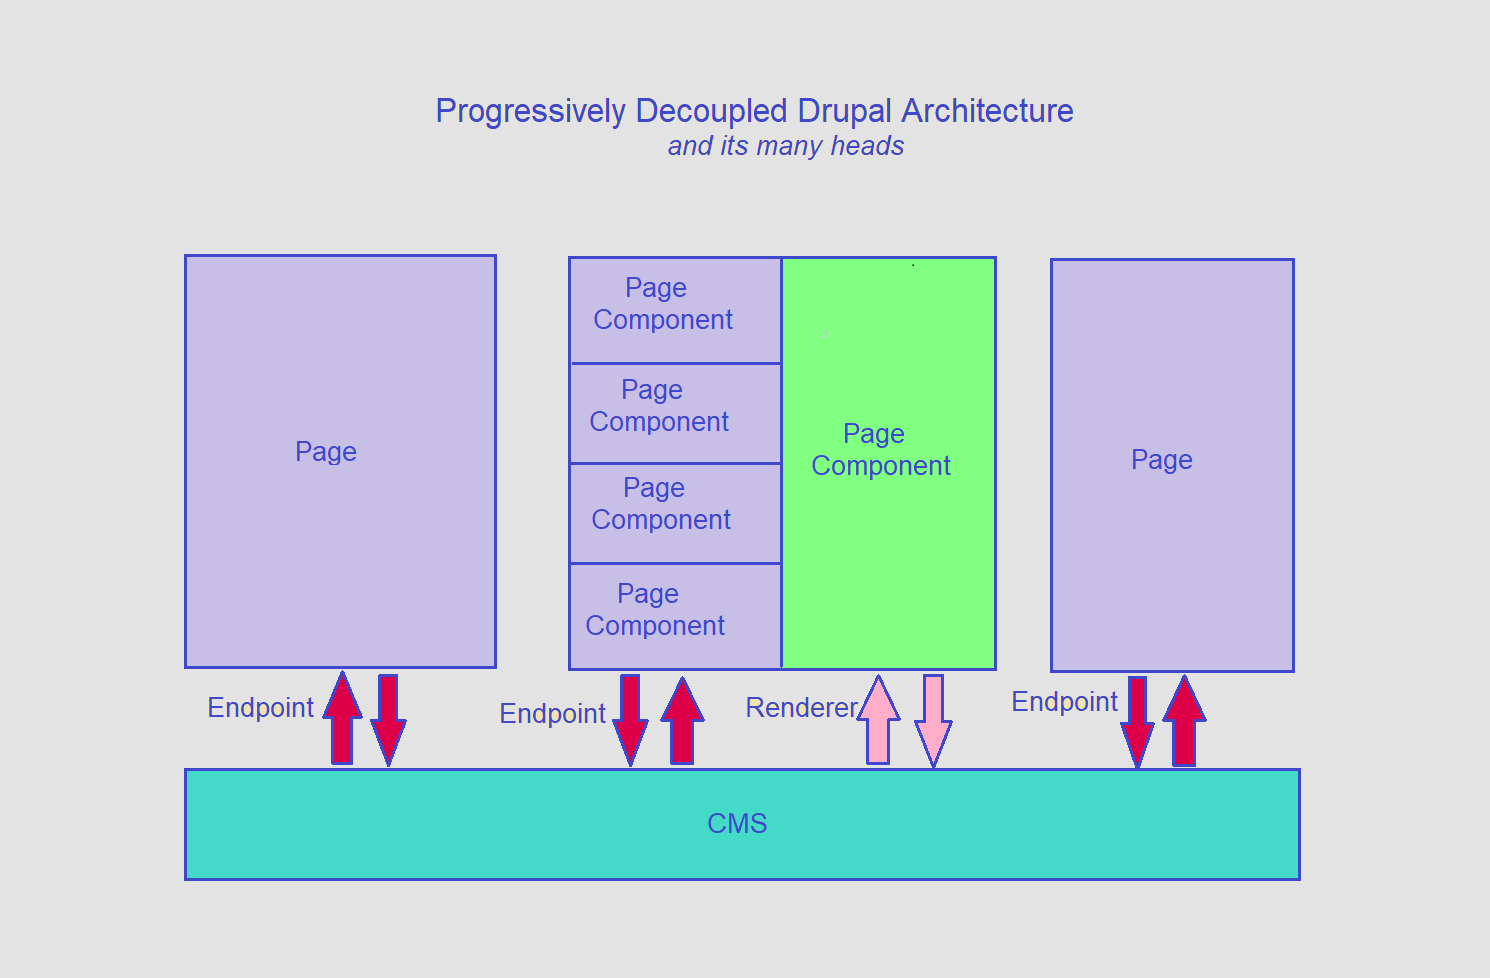 The layout of a progressively decoupled Drupal architecture is shown to depict its many heads.